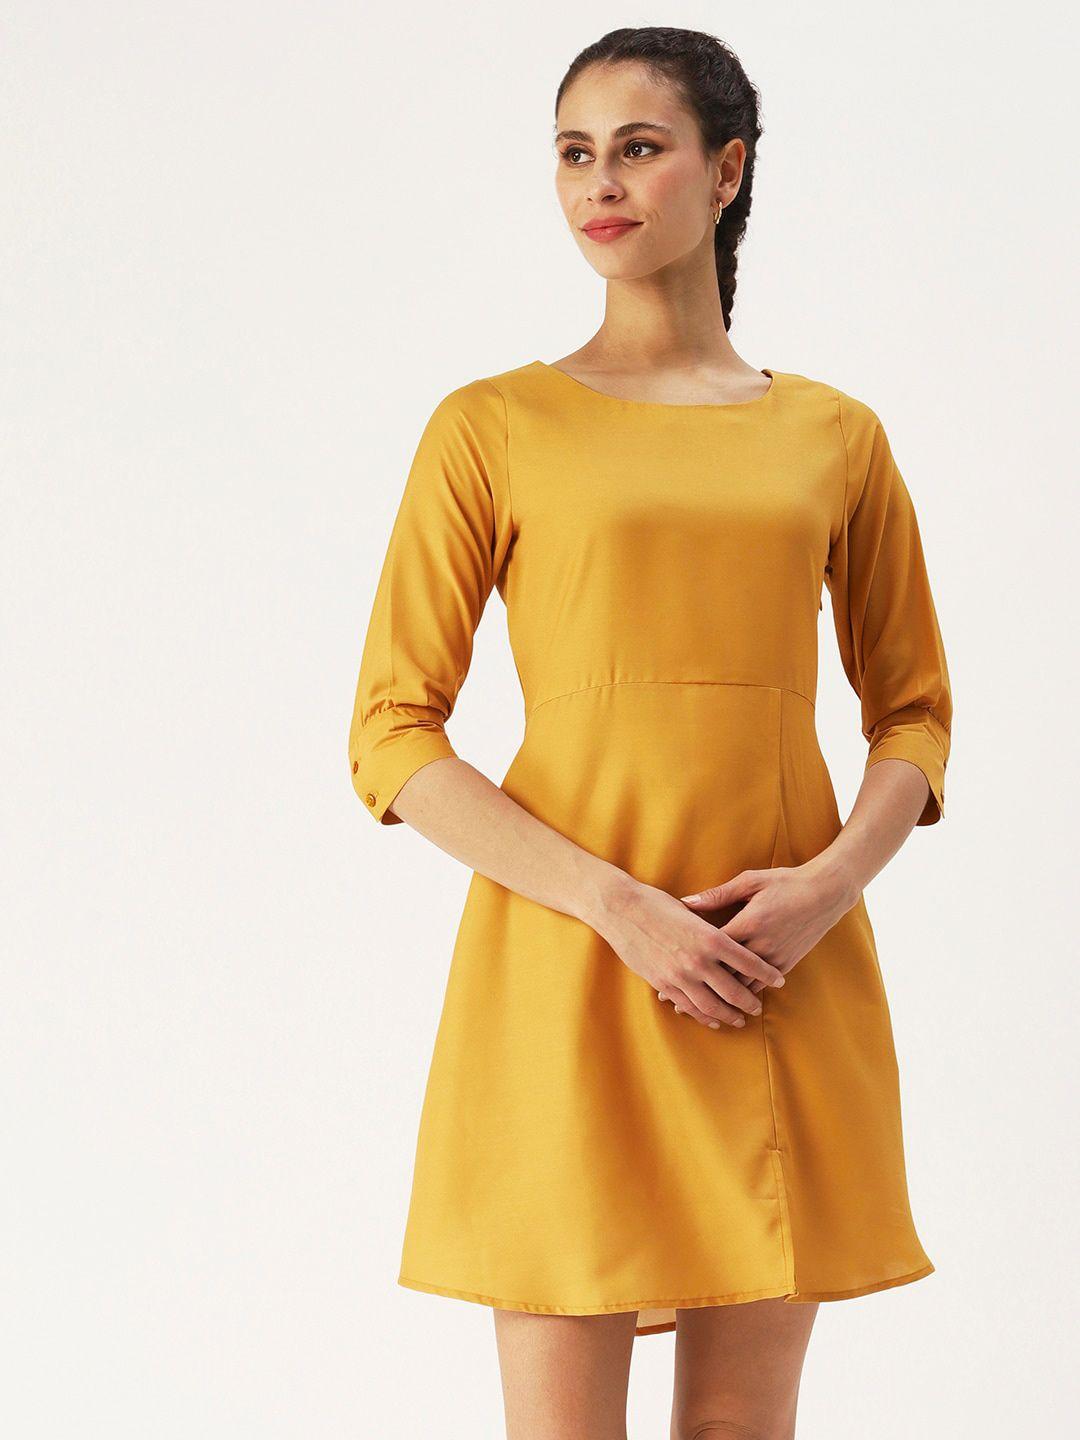 dressberry round neck cuffed sleeves a-line dress